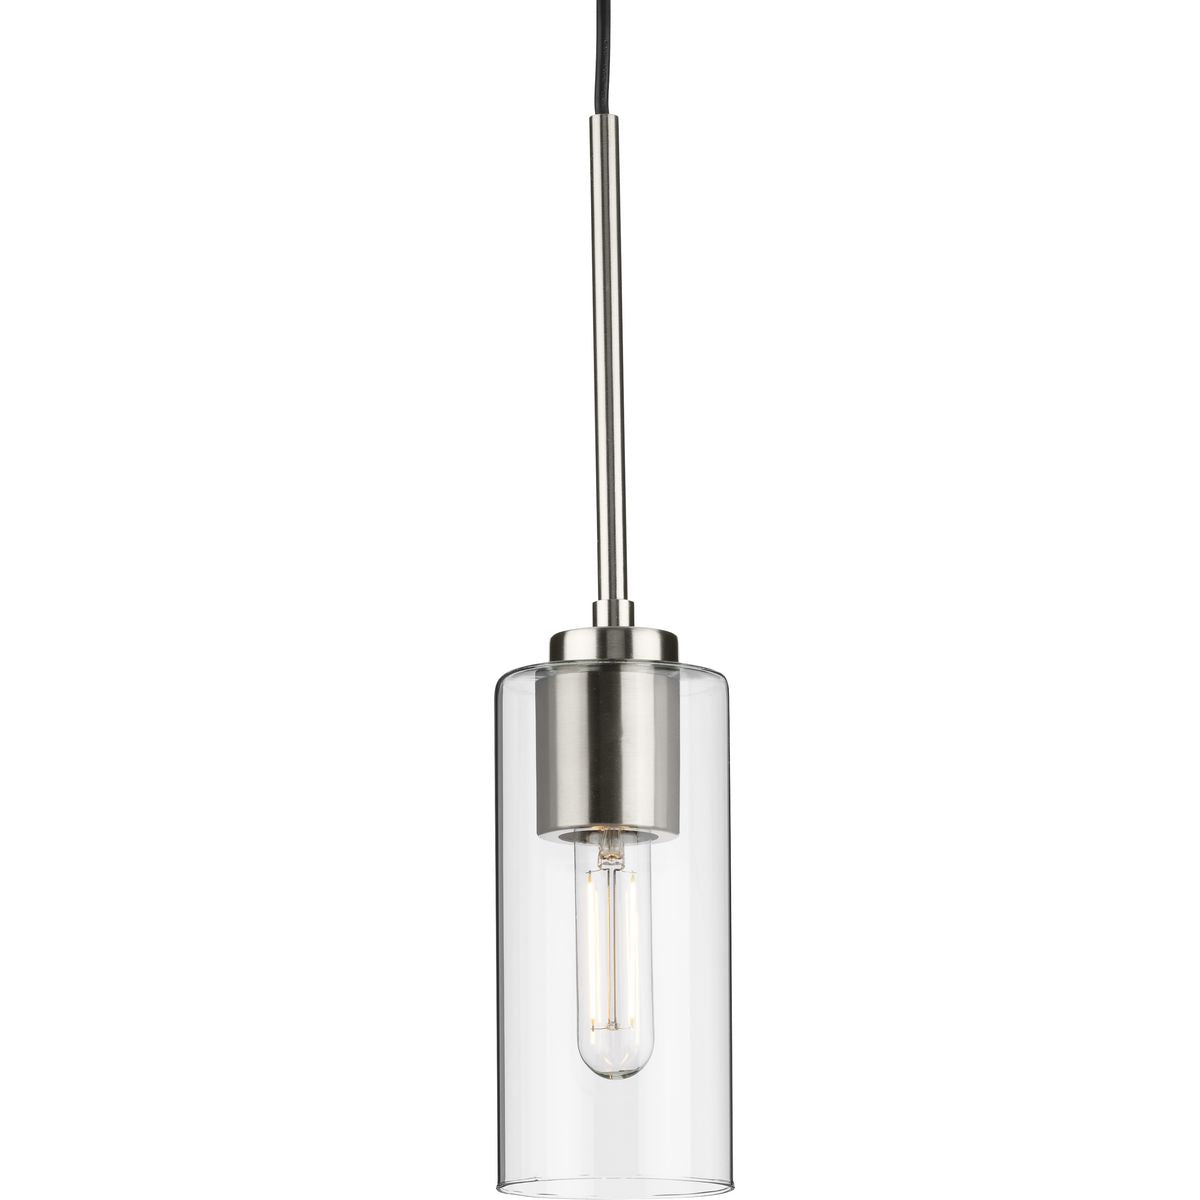 PROGRESS LIGHTING P500403-009 Brushed Nickel Cofield Collection One-Light Brushed Nickel Transitional Pendant